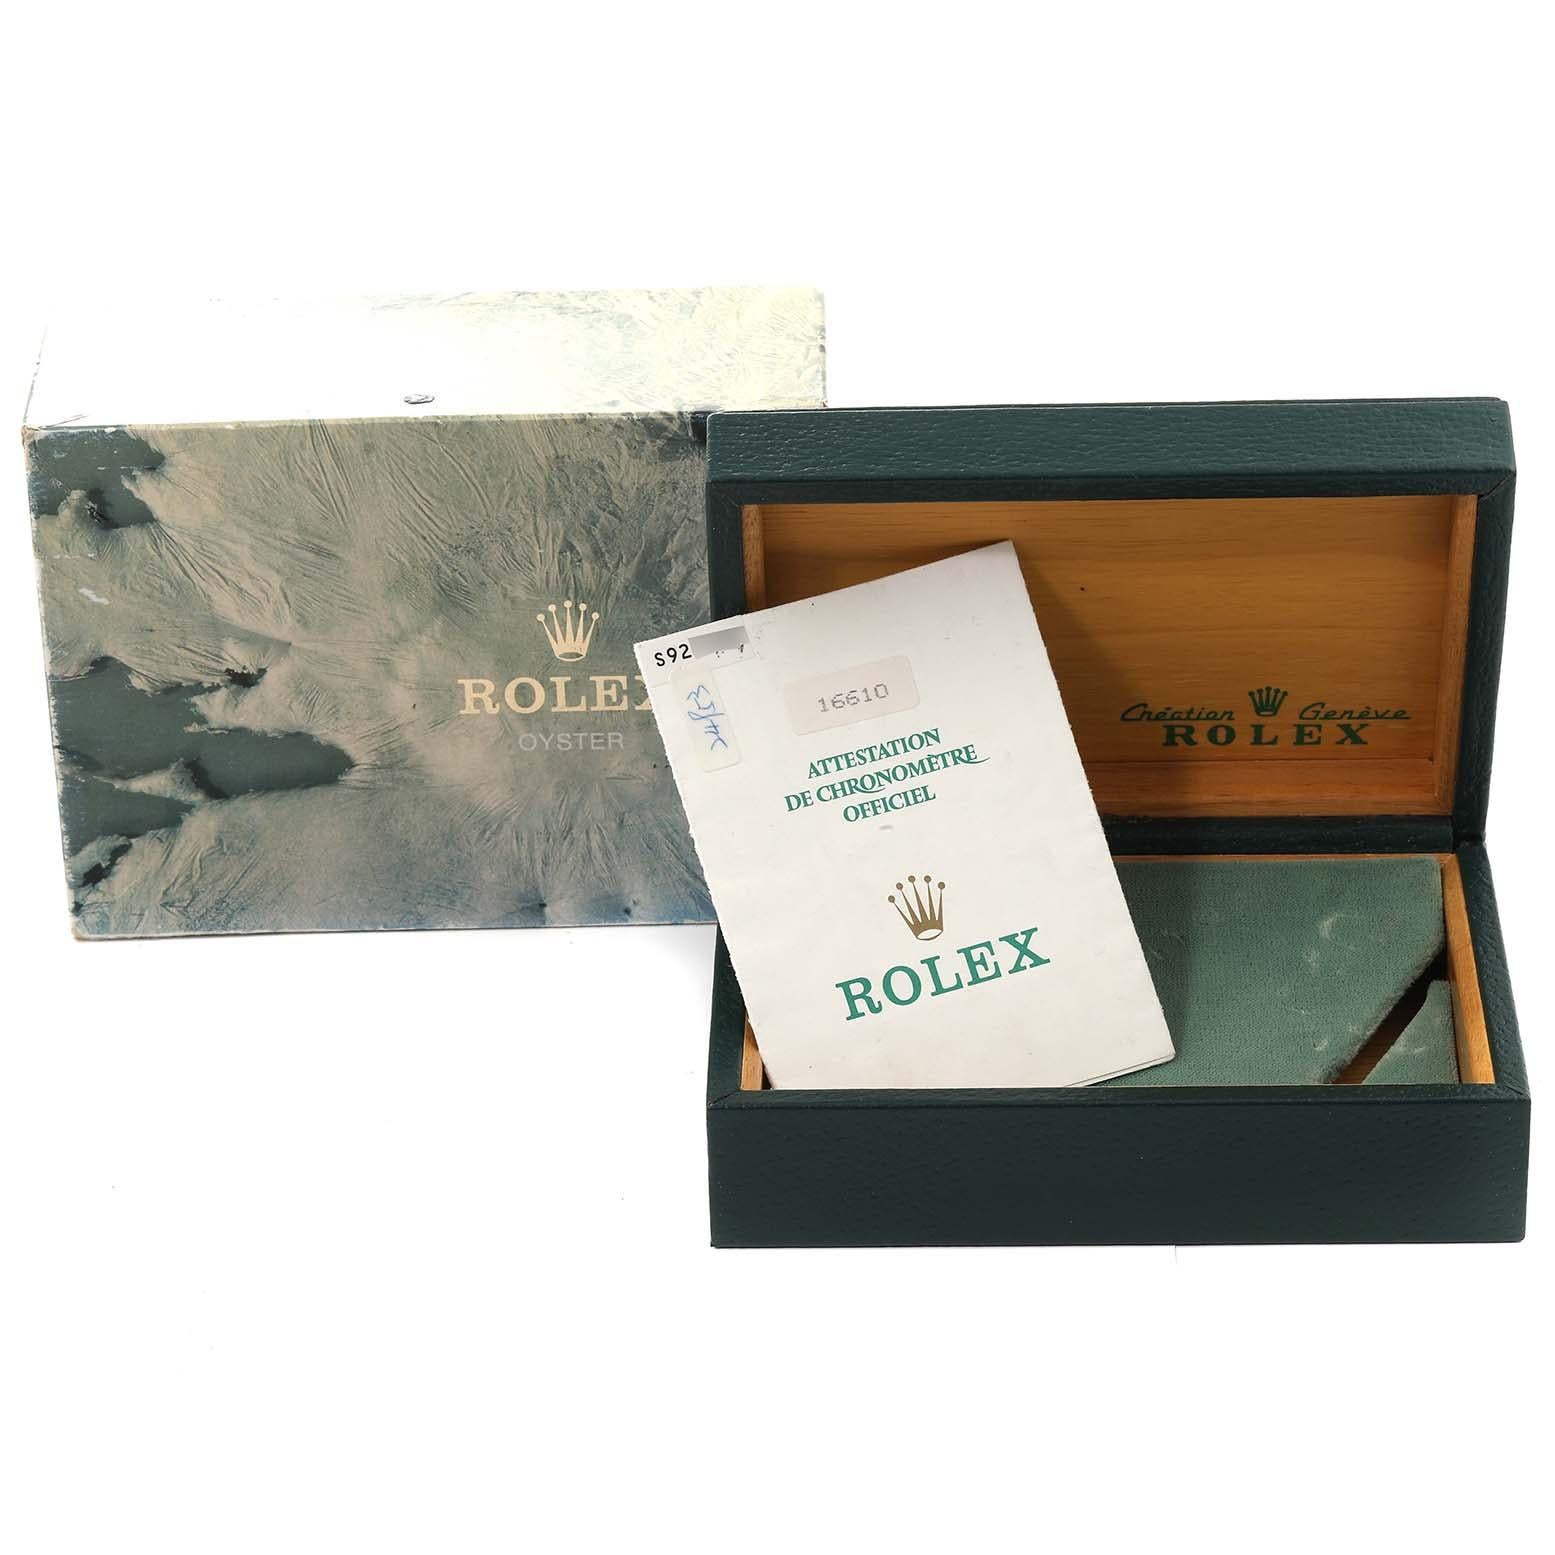 Rolex Submariner Date Black Frosted Dial Steel Mens Watch 16610 Box Papers en vente 6